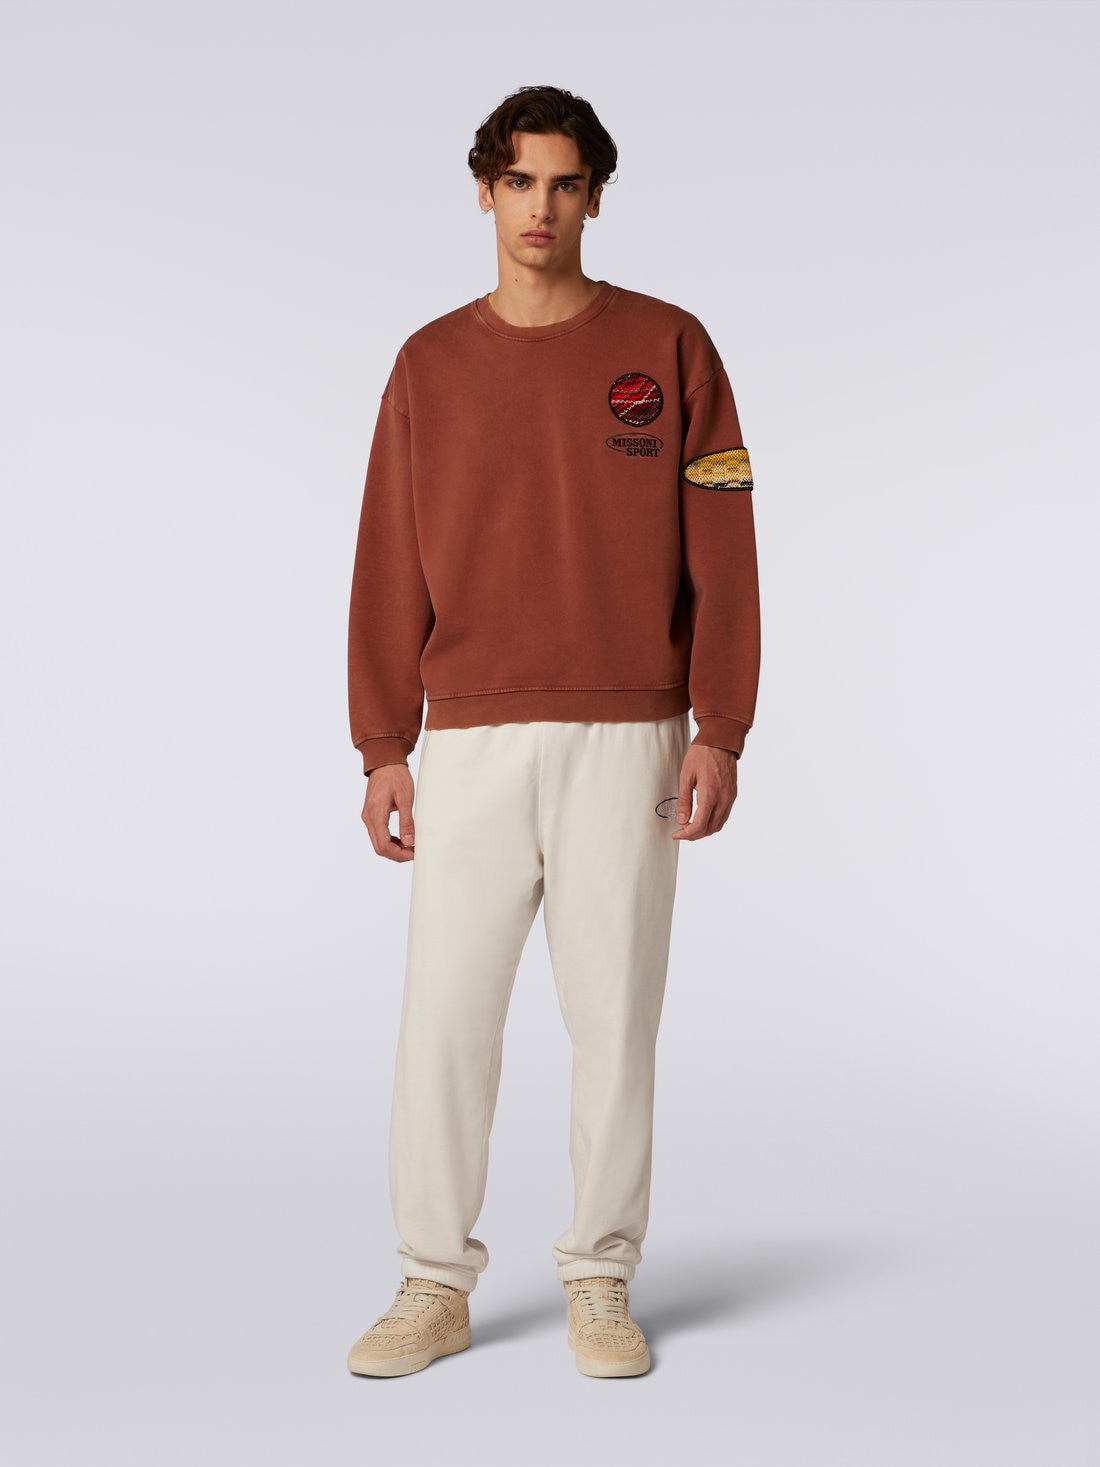 Cotton fleece crew-neck pullover with knitted insert, Rust - TS23WW01BJ00H0S80B7 - 1